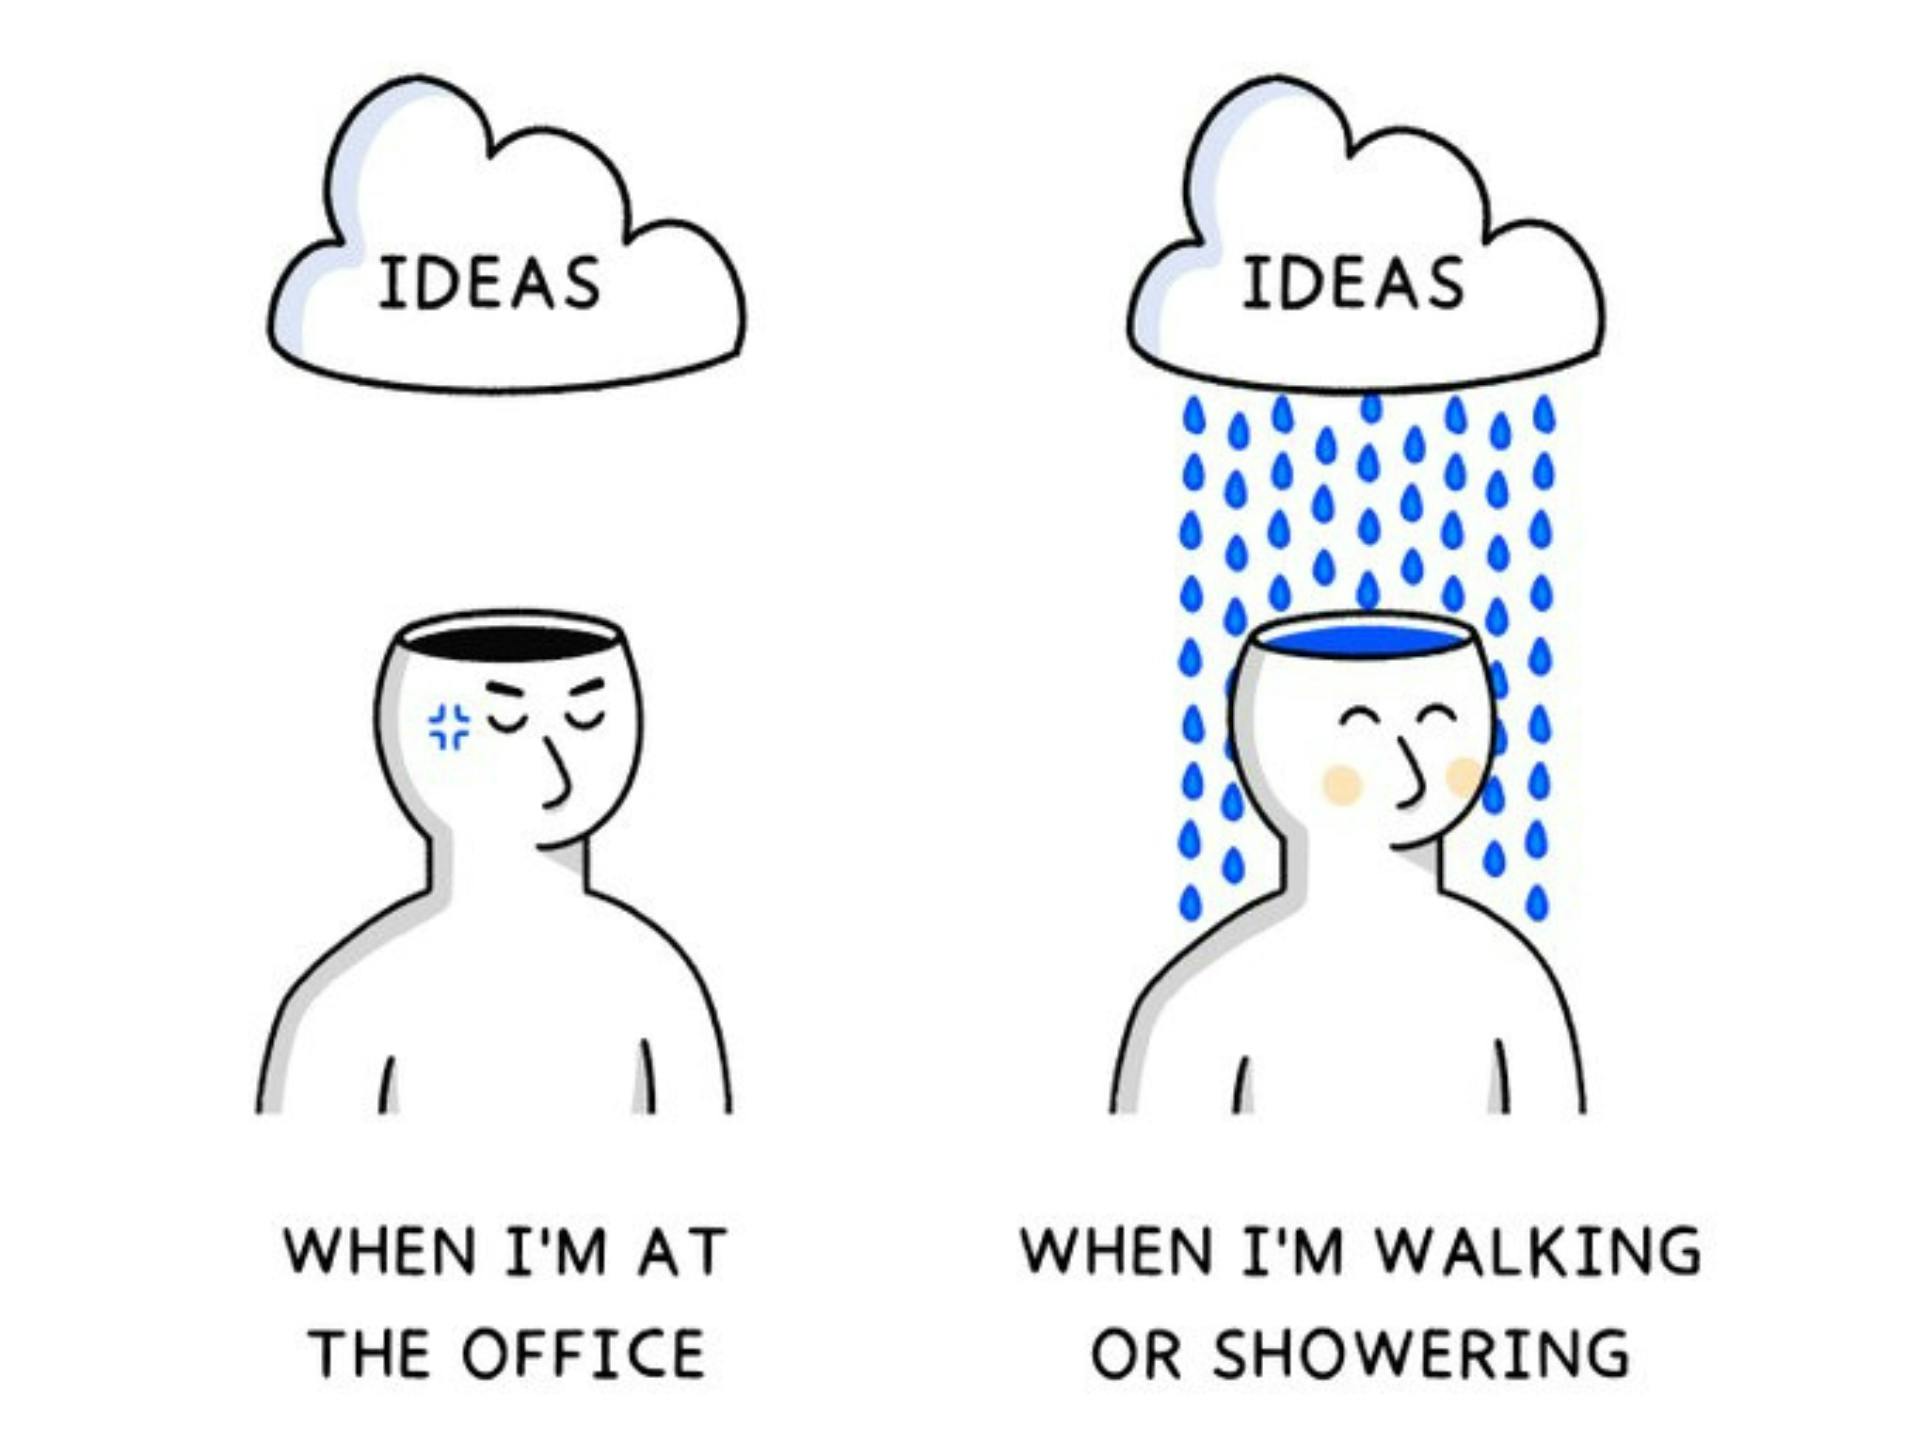 Ideas pouring when walking or showering, with illustration